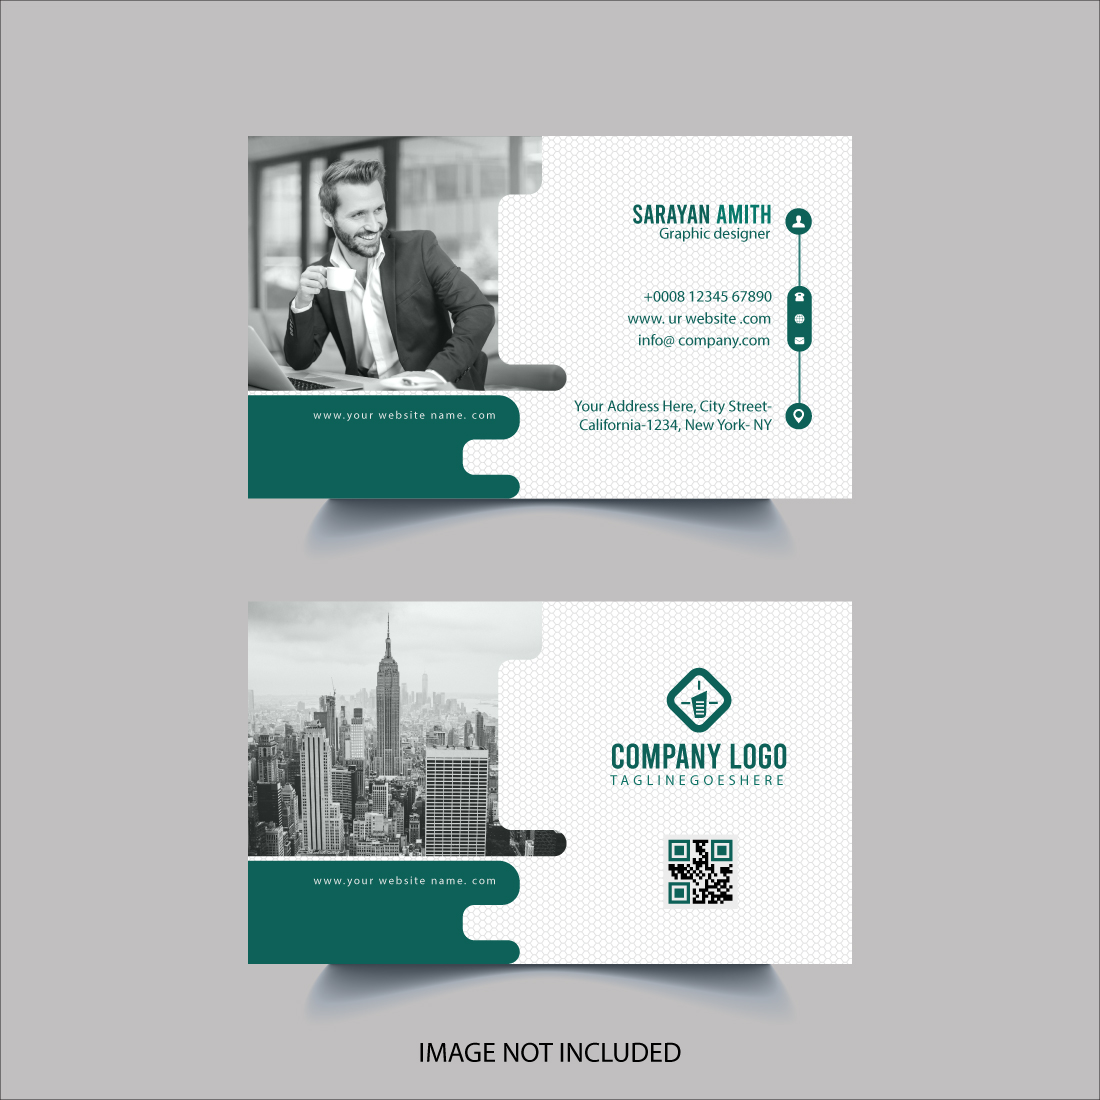 Four Professional Creative Clean and Modern Business Card Design Bundle cover image.